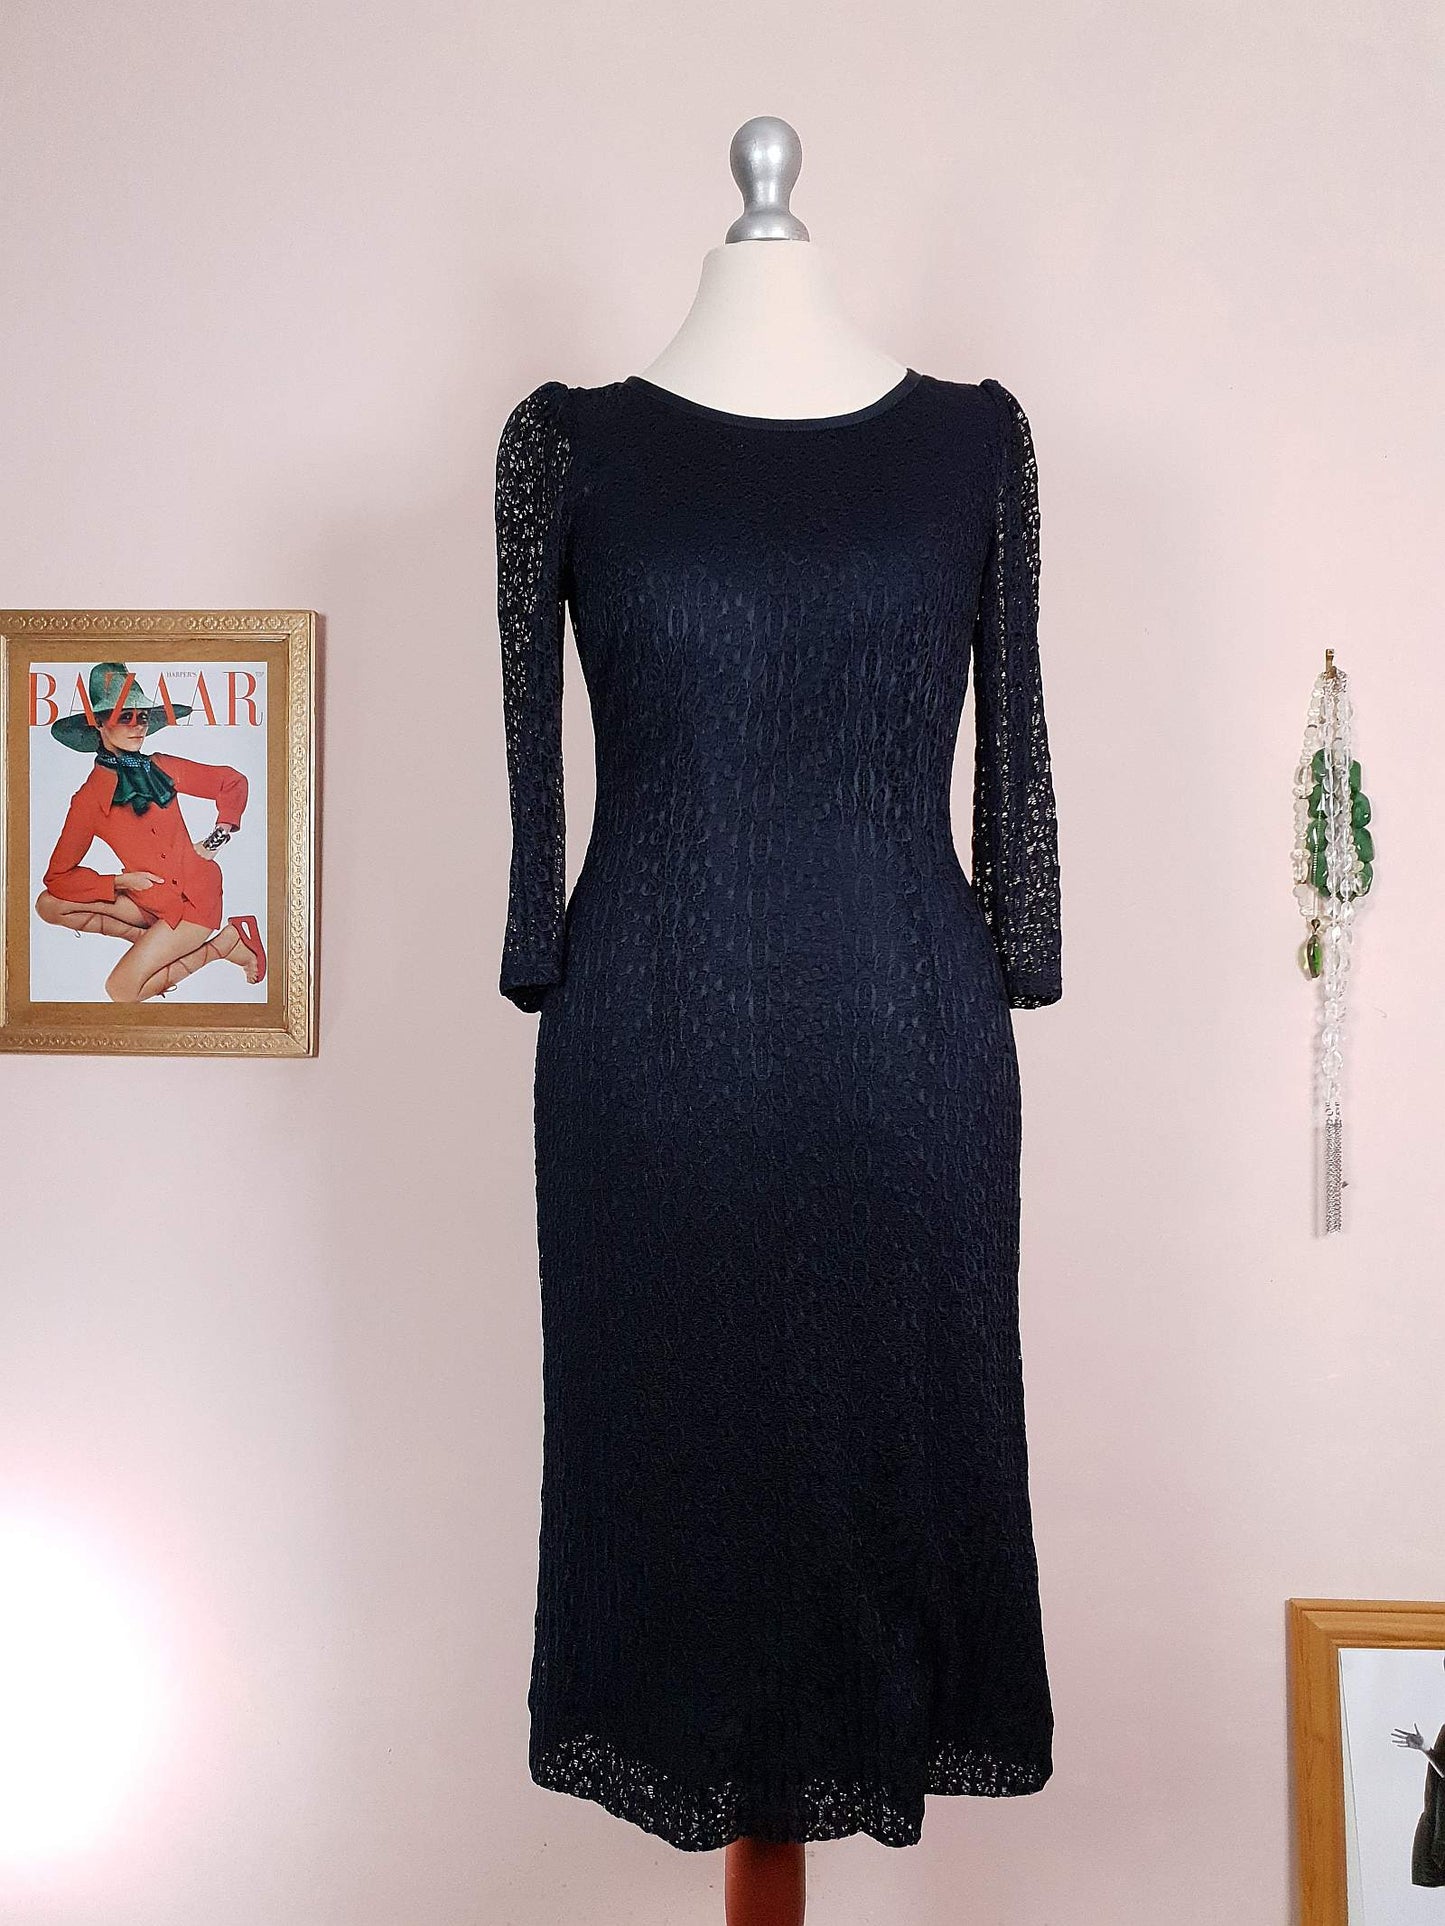 Pre-Owned Alice Temperley Navy Blue Lace Dress Size 6 Midi